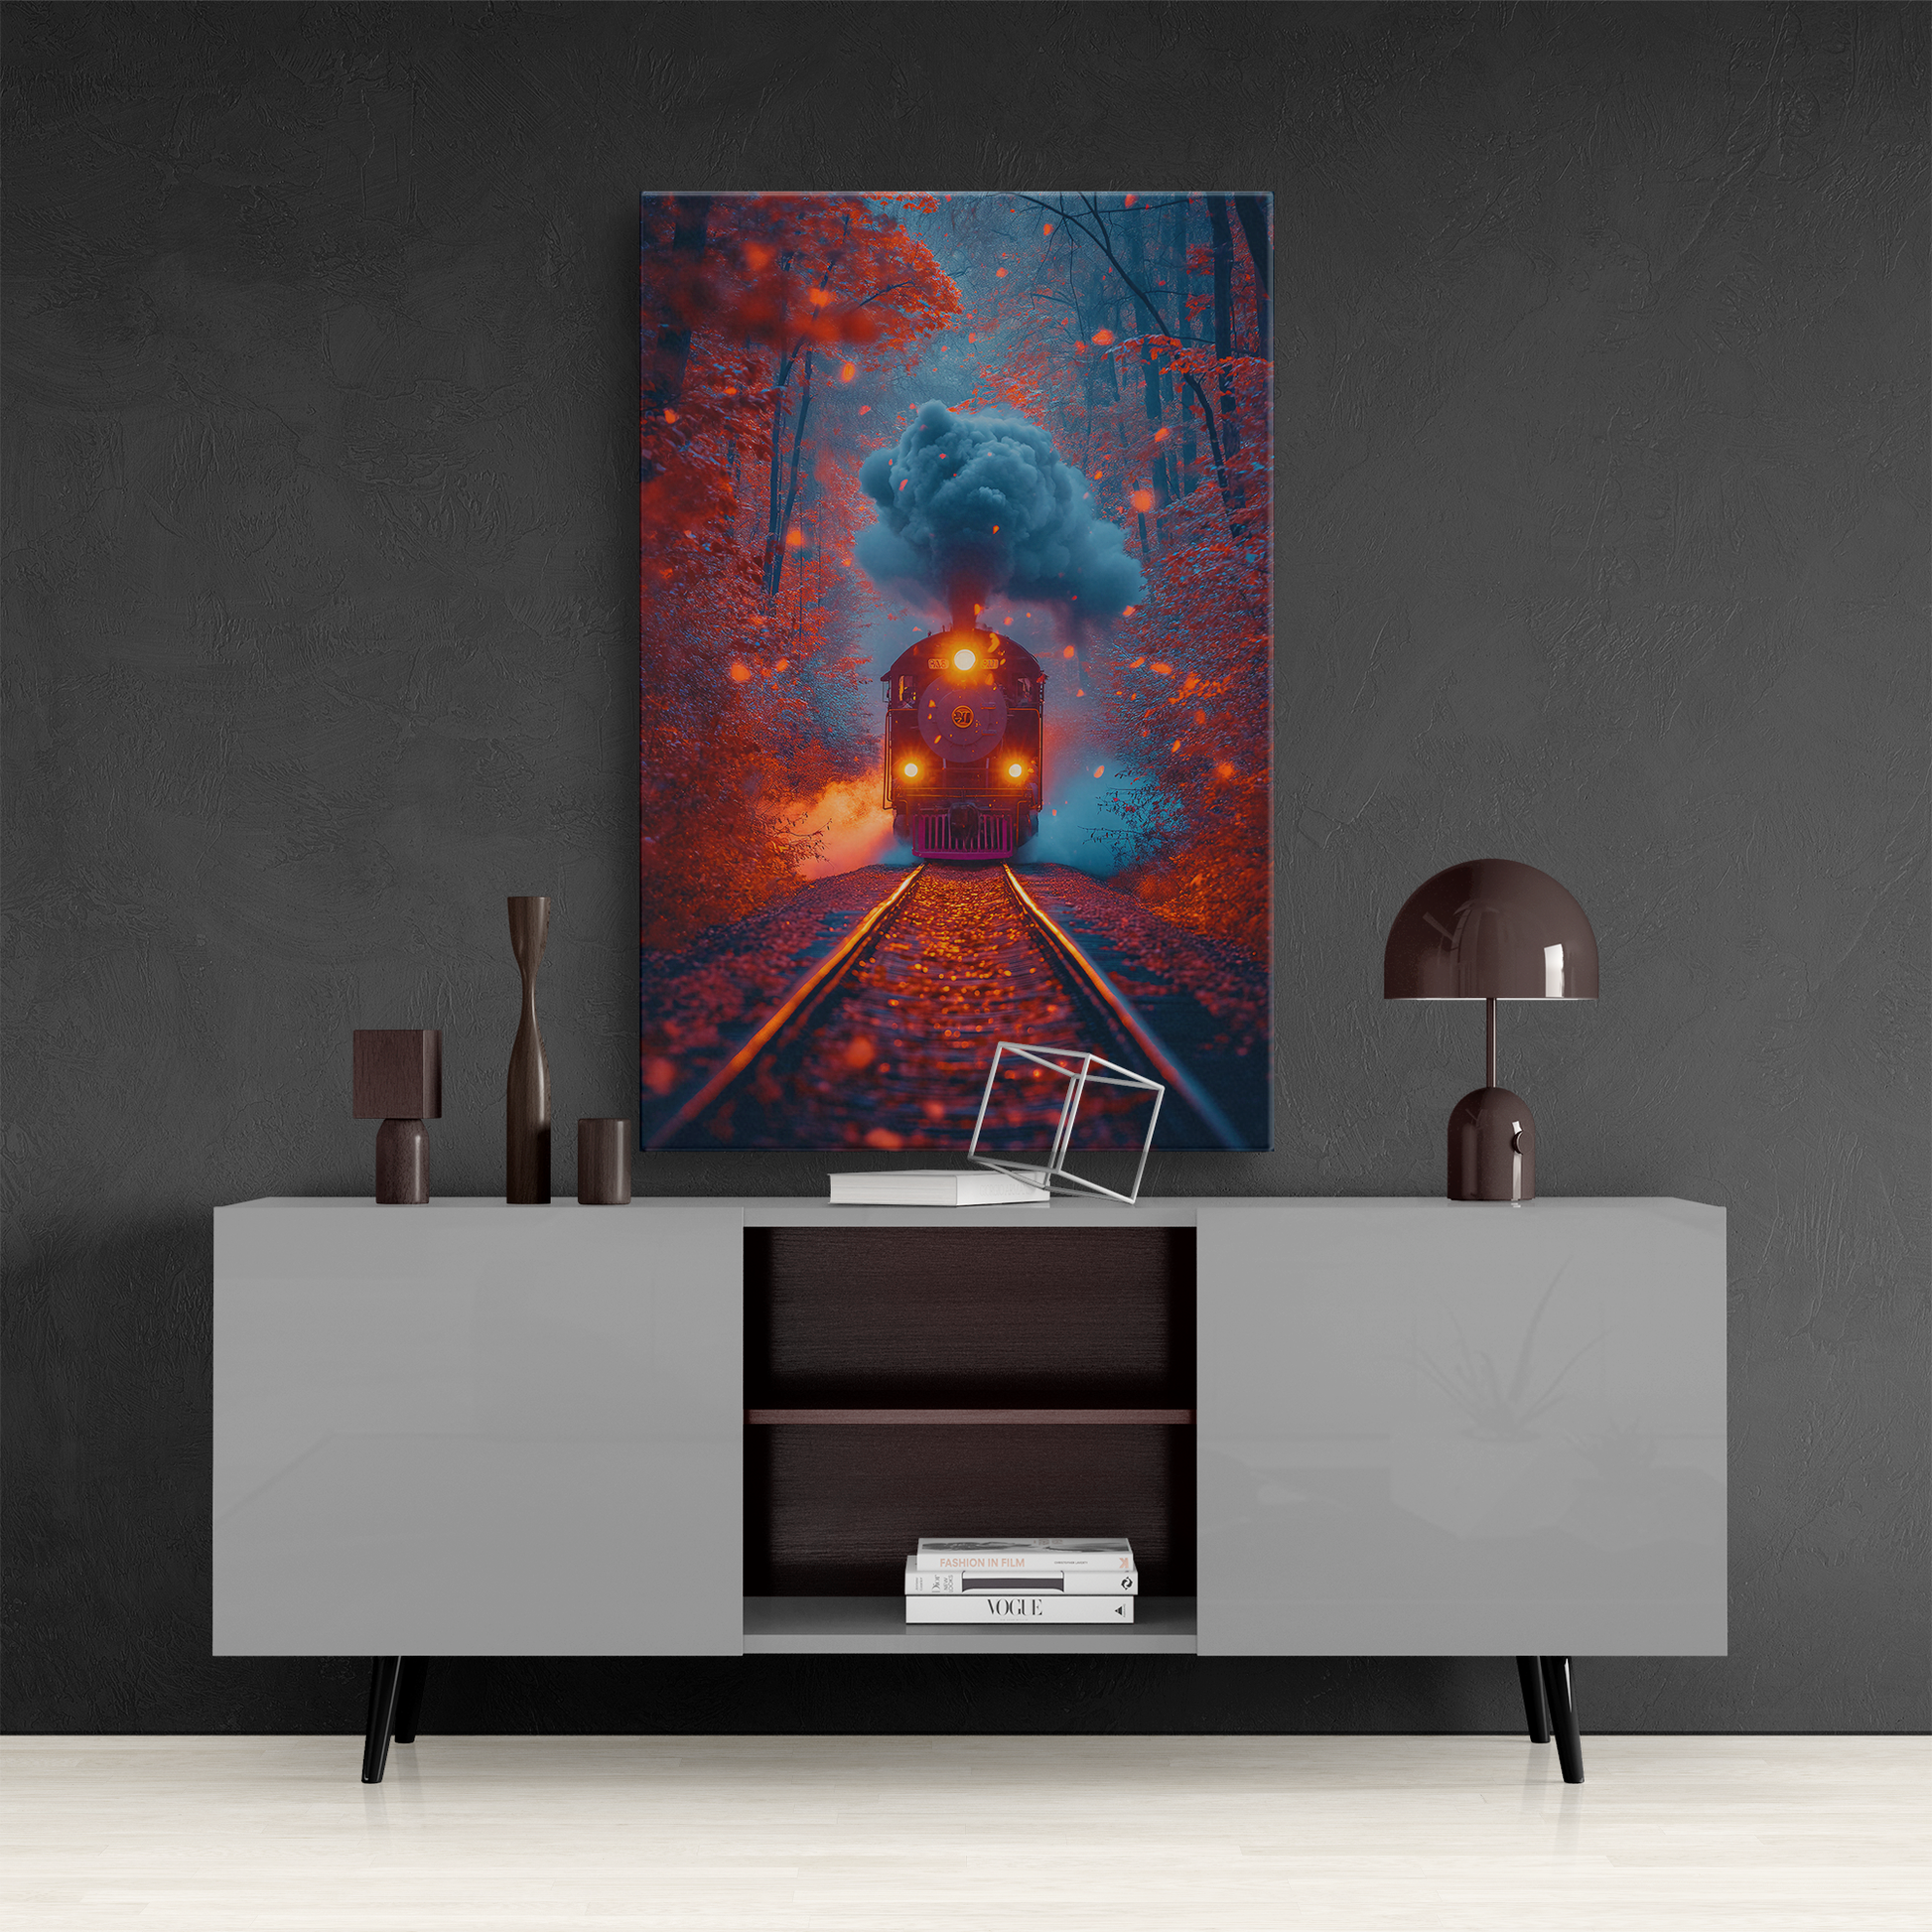 Autumn Journey (Canvas)Autumn Journey Experience the fusion of art and ethics with RimaGallery's eco-friendly canvases. Stunning visuals, diverse sizes, and sustainable materials. TransforRimaGallery